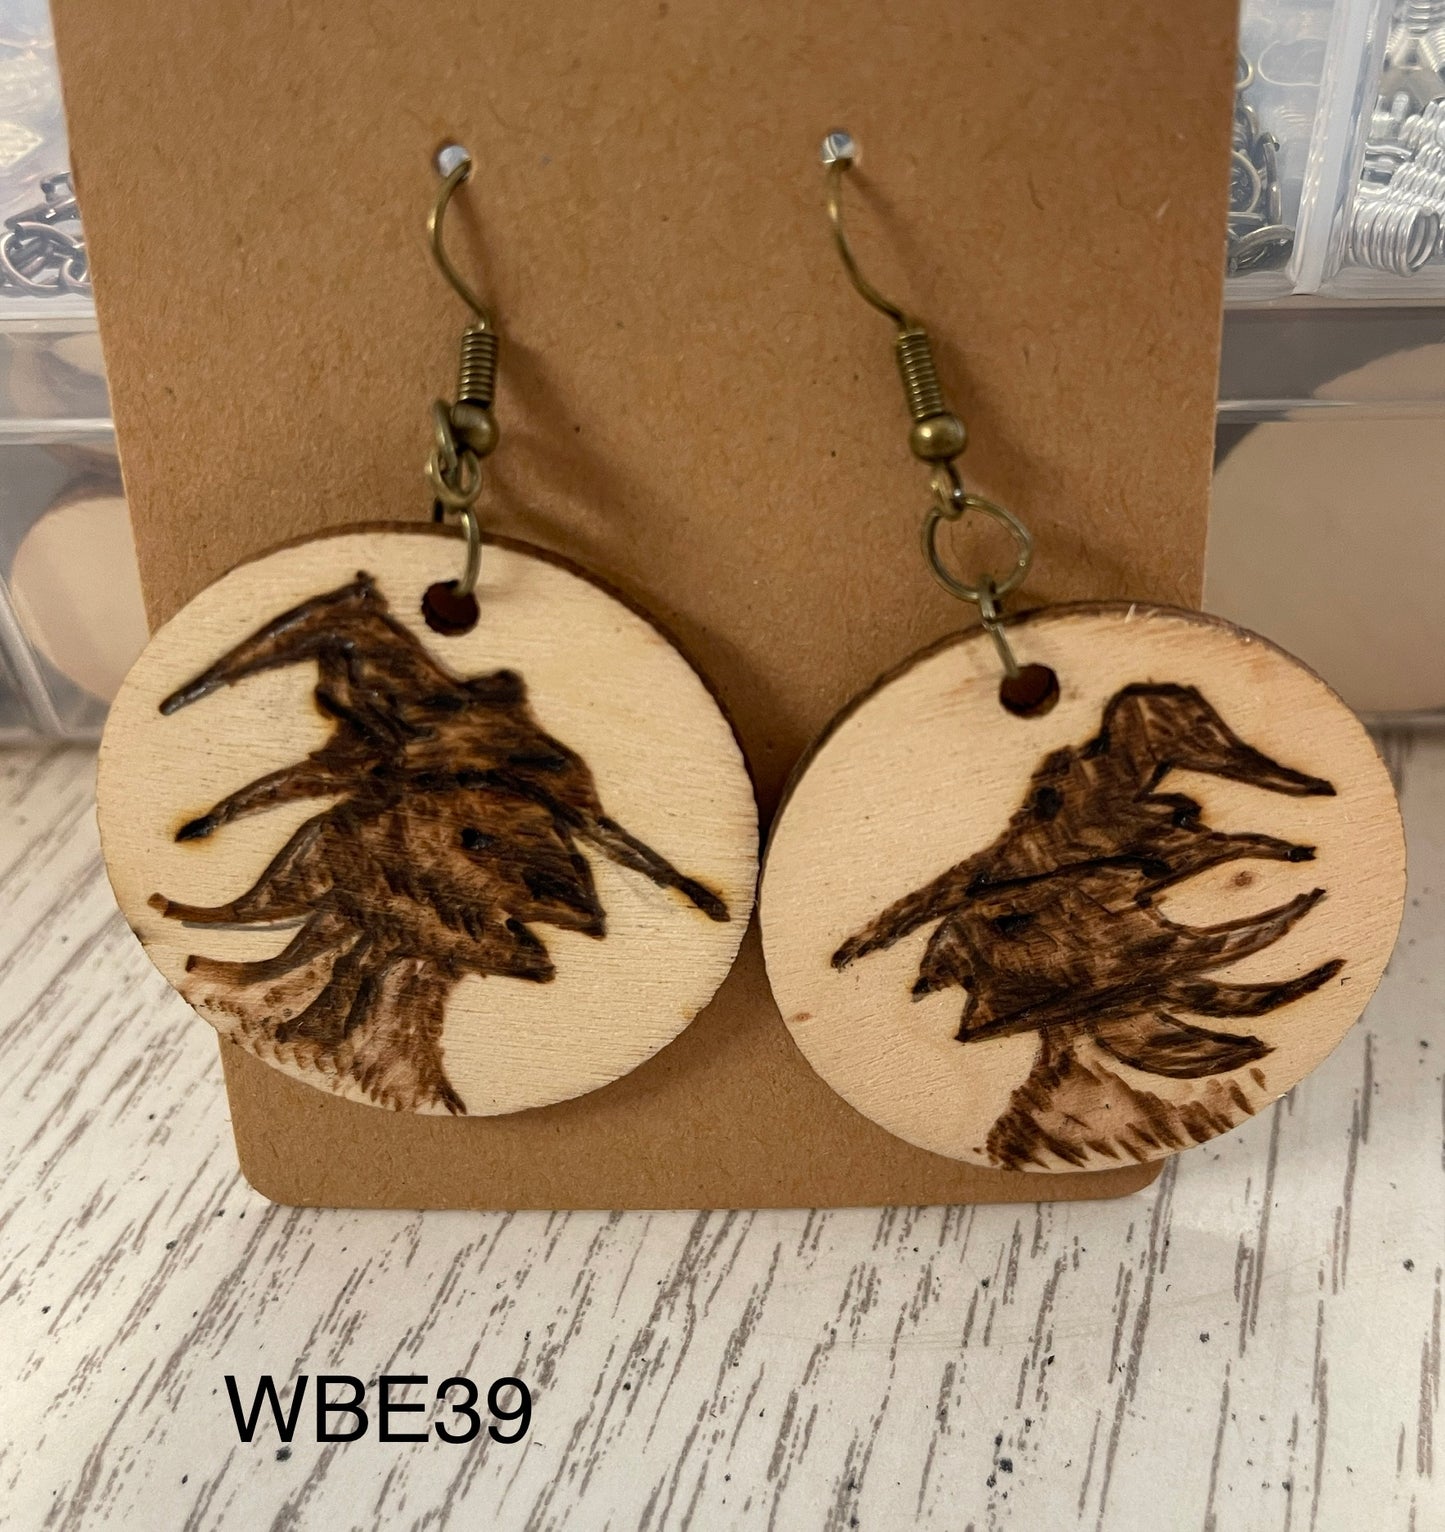 Wood burned witch silhouette earrings WB339